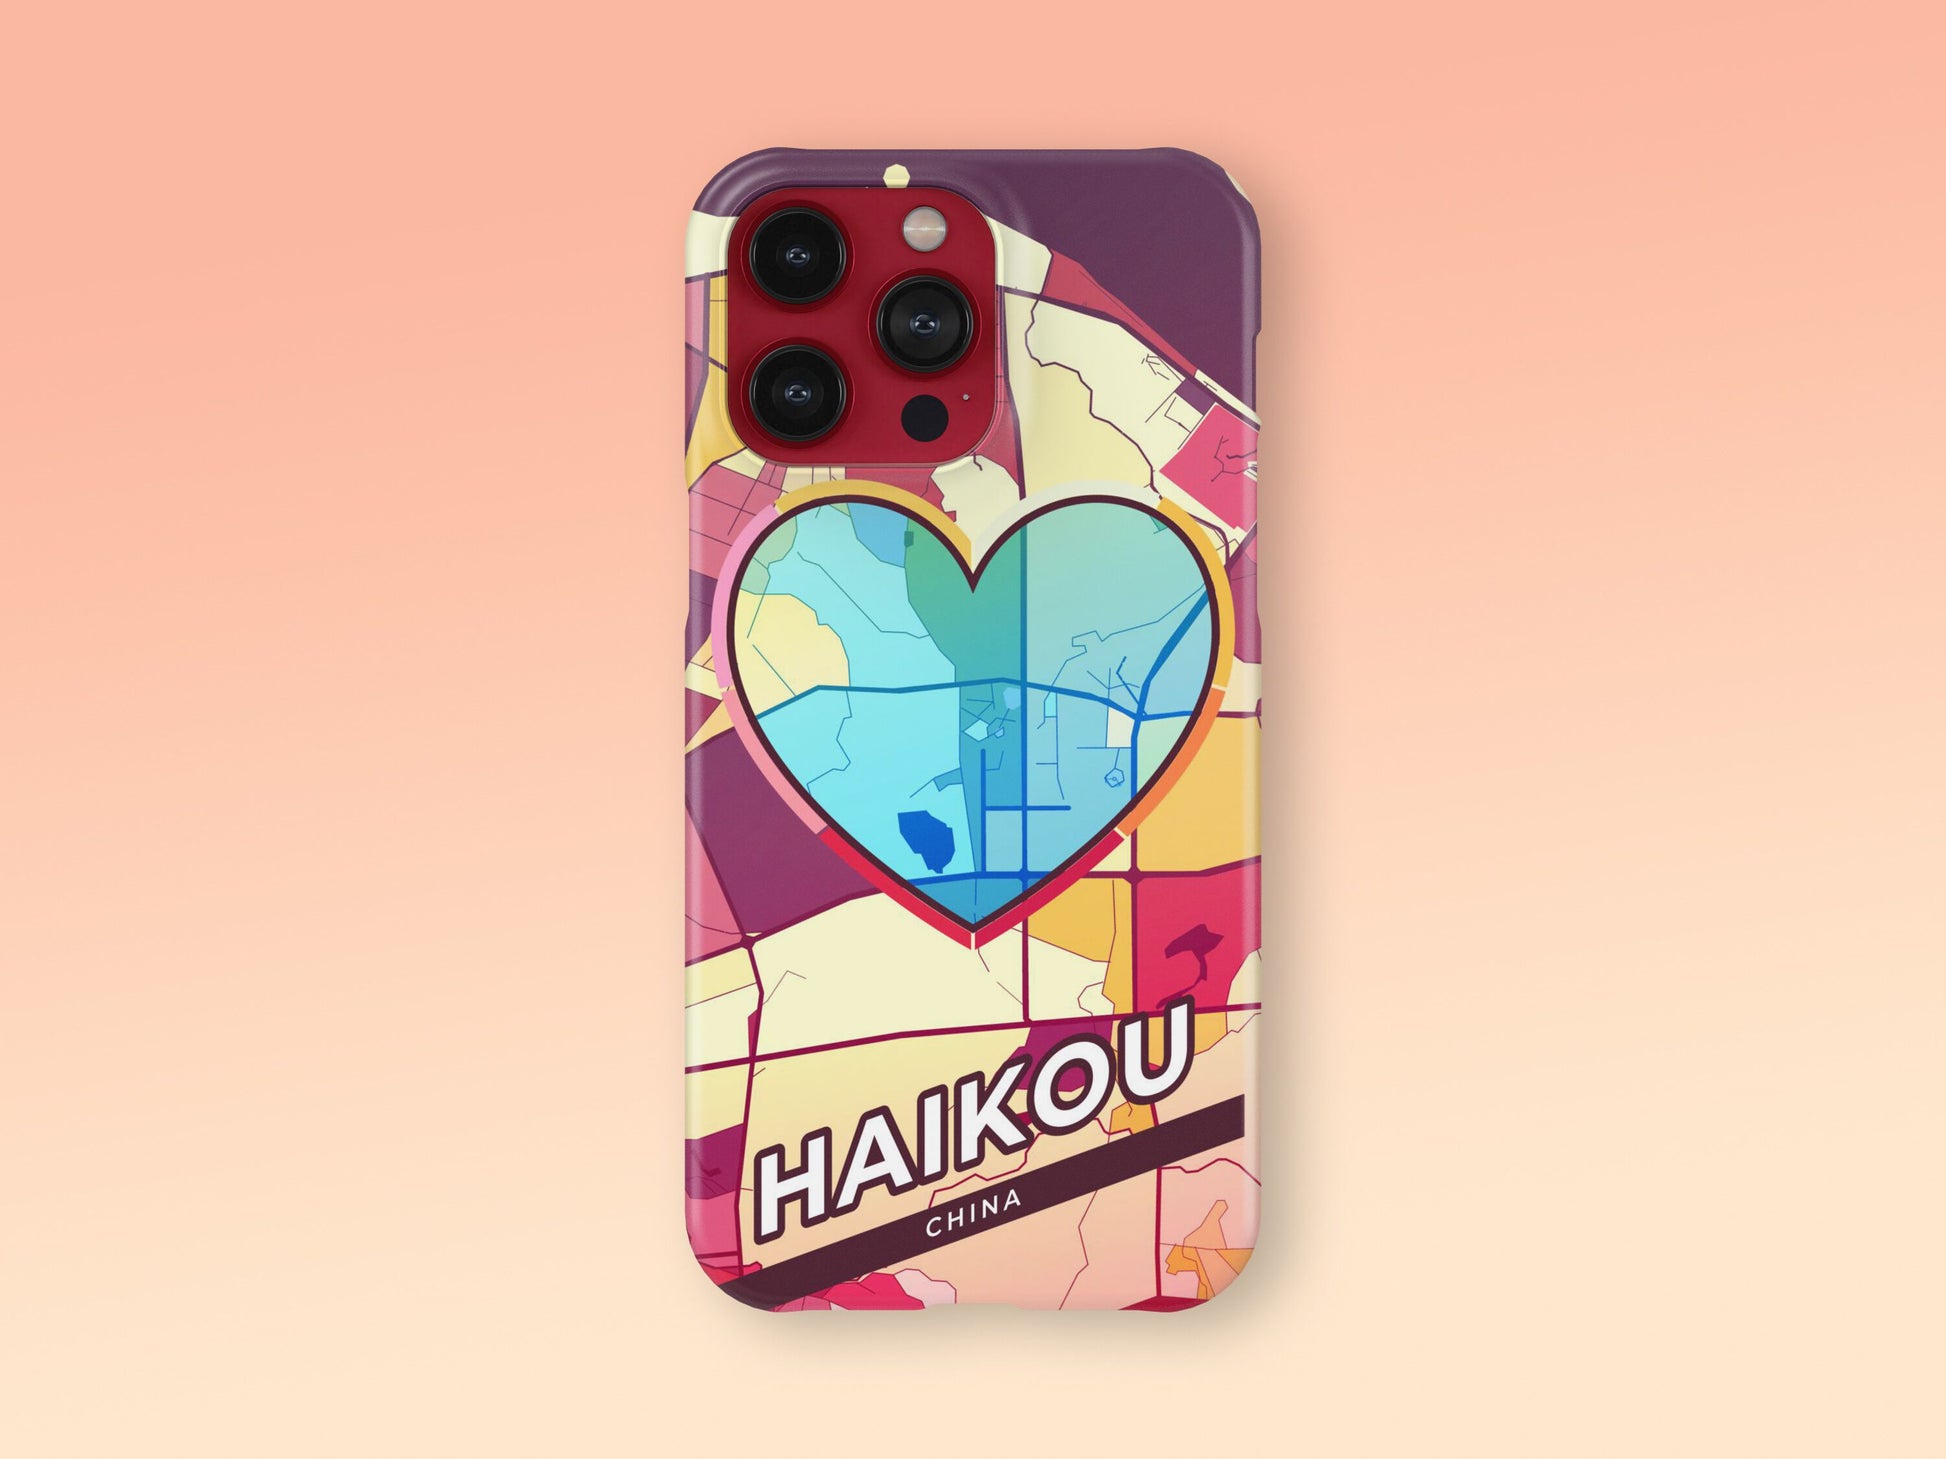 Haikou China slim phone case with colorful icon. Birthday, wedding or housewarming gift. Couple match cases. 2